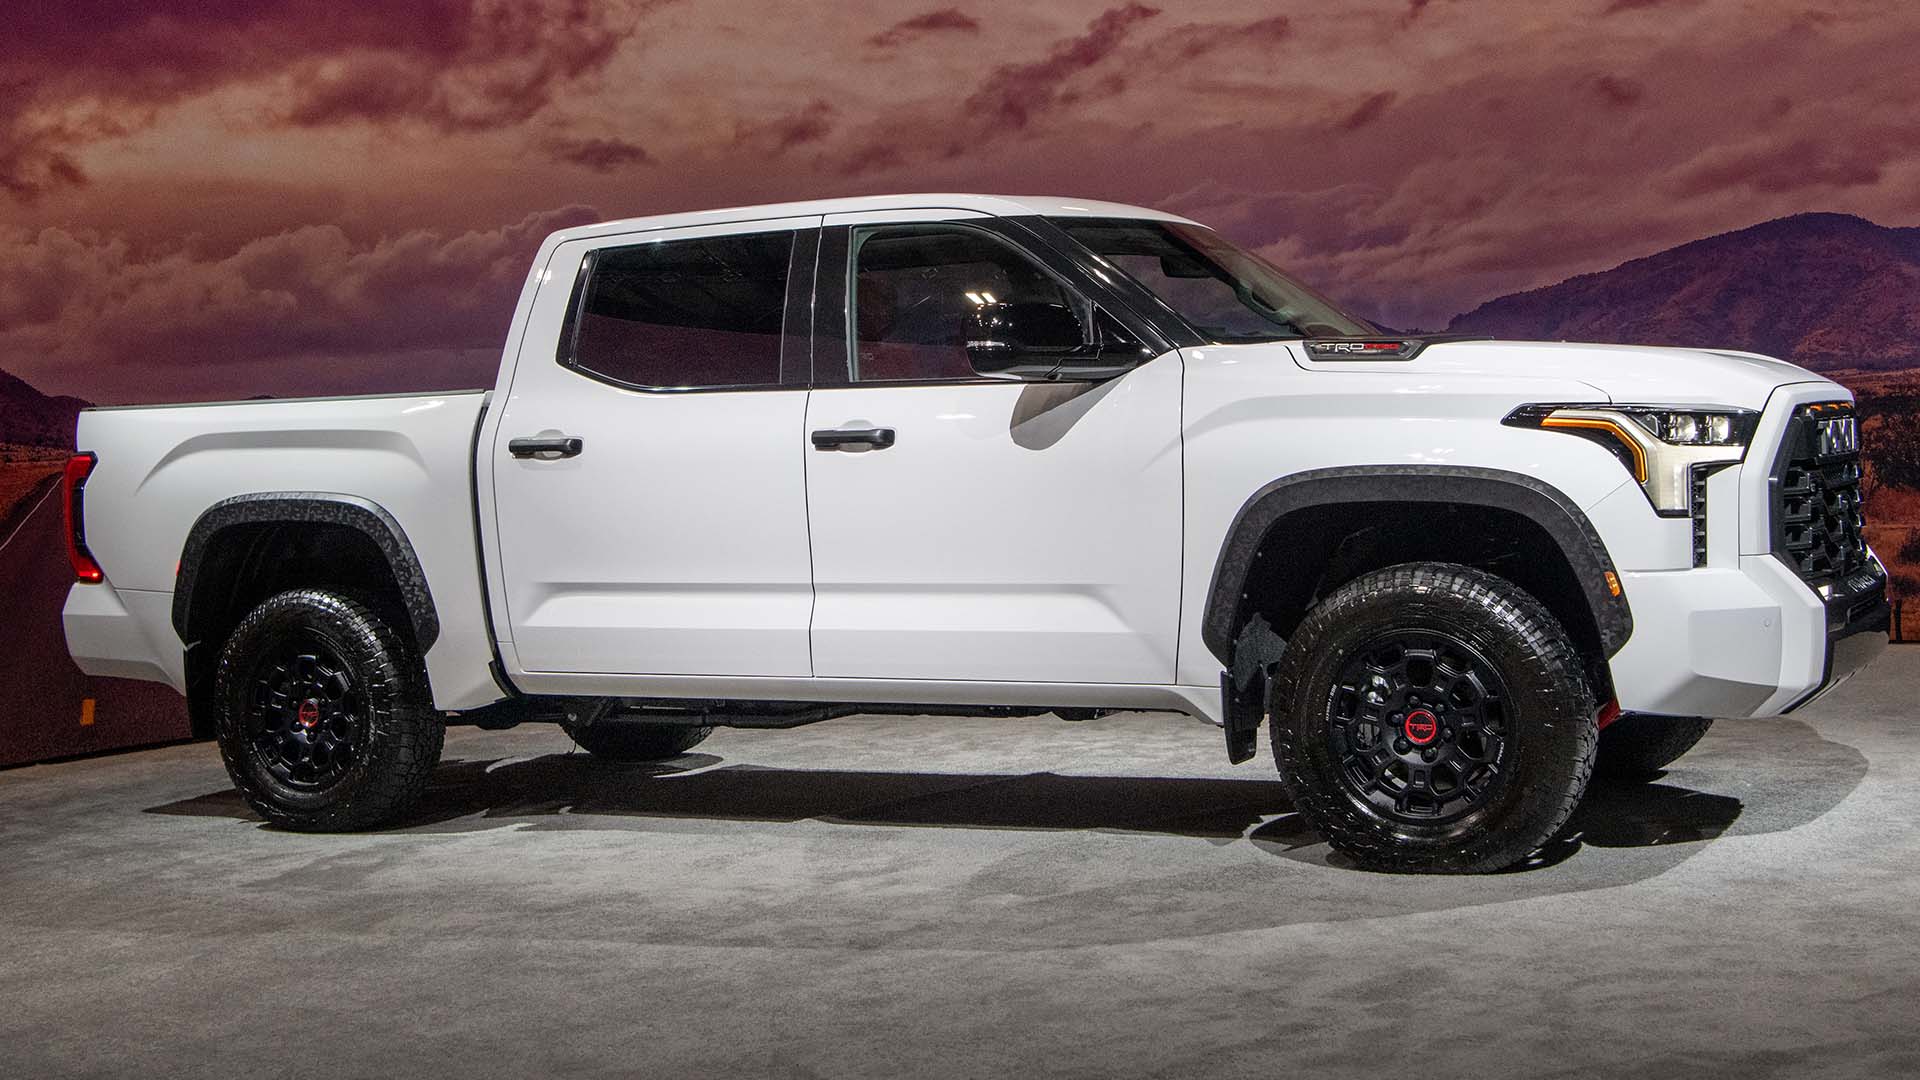 2022 Toyota Tundra TRD Pro A Hybrid OffRoader With Fox Shocks and